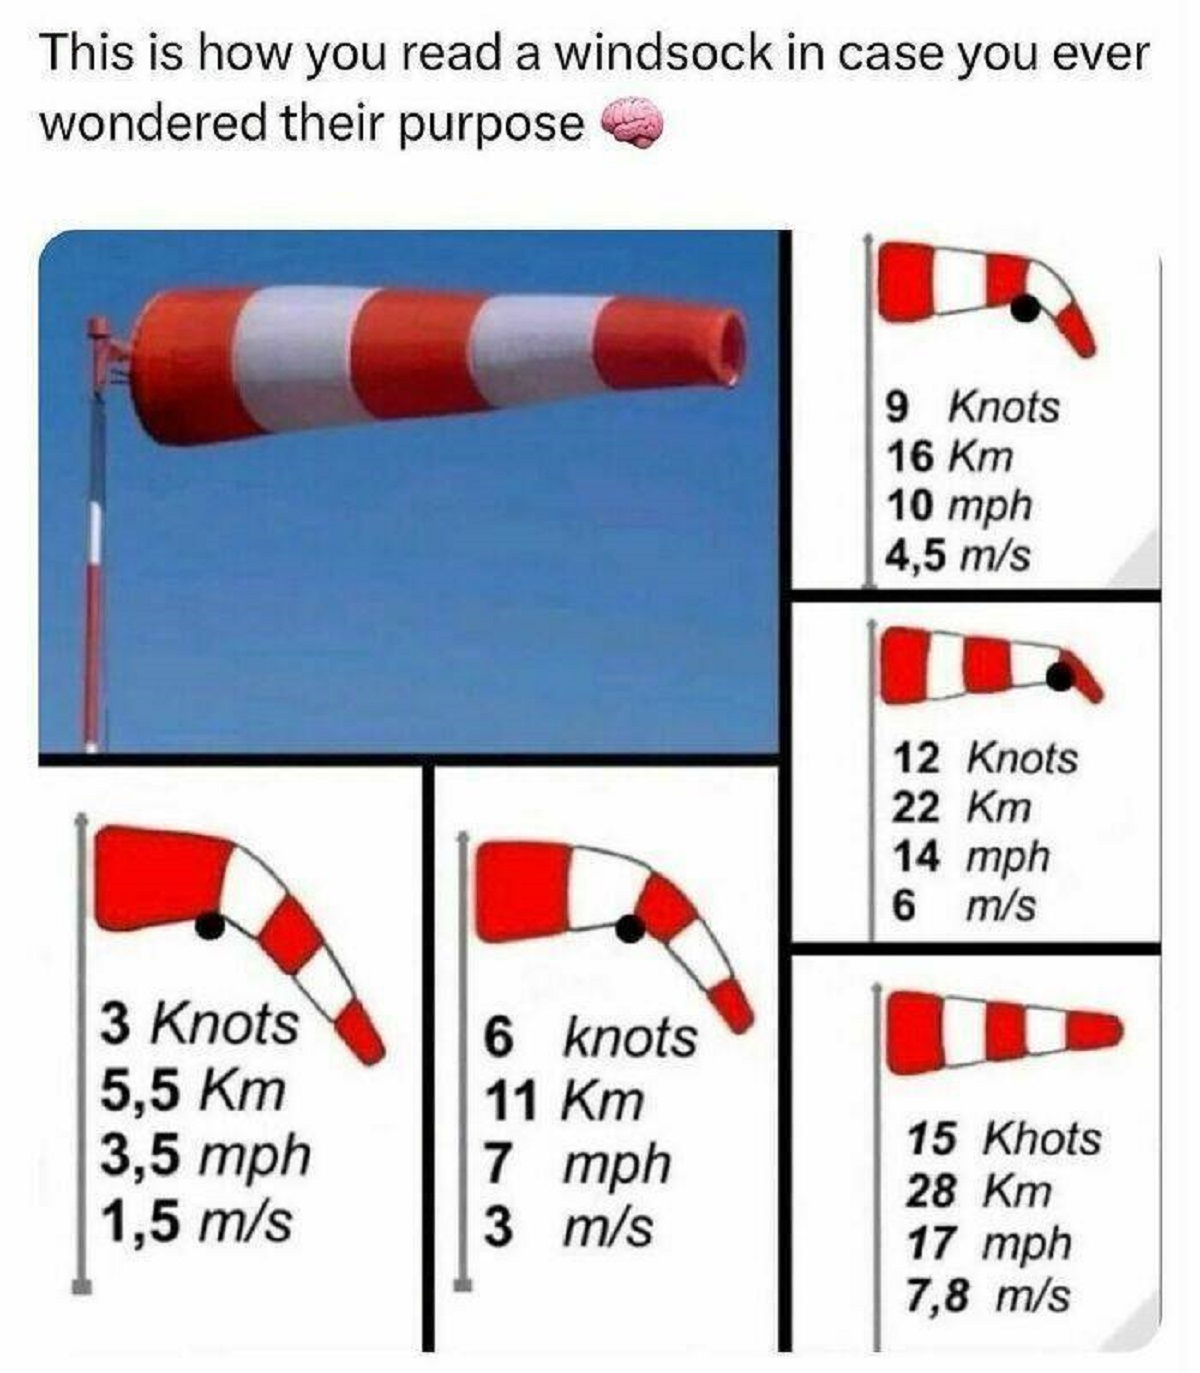 read a windsock - This is how you read a windsock in case you ever wondered their purpose 9 Knots 16 Km 10 mph 4,5 ms 12 Knots 22 Km 14 mph 6 ms 3 Knots 5,5 Km 3,5 mph 1,5 ms 6 knots 11 Km 15 Khots 7 mph 28 Km 3 ms 17 mph 7,8 ms